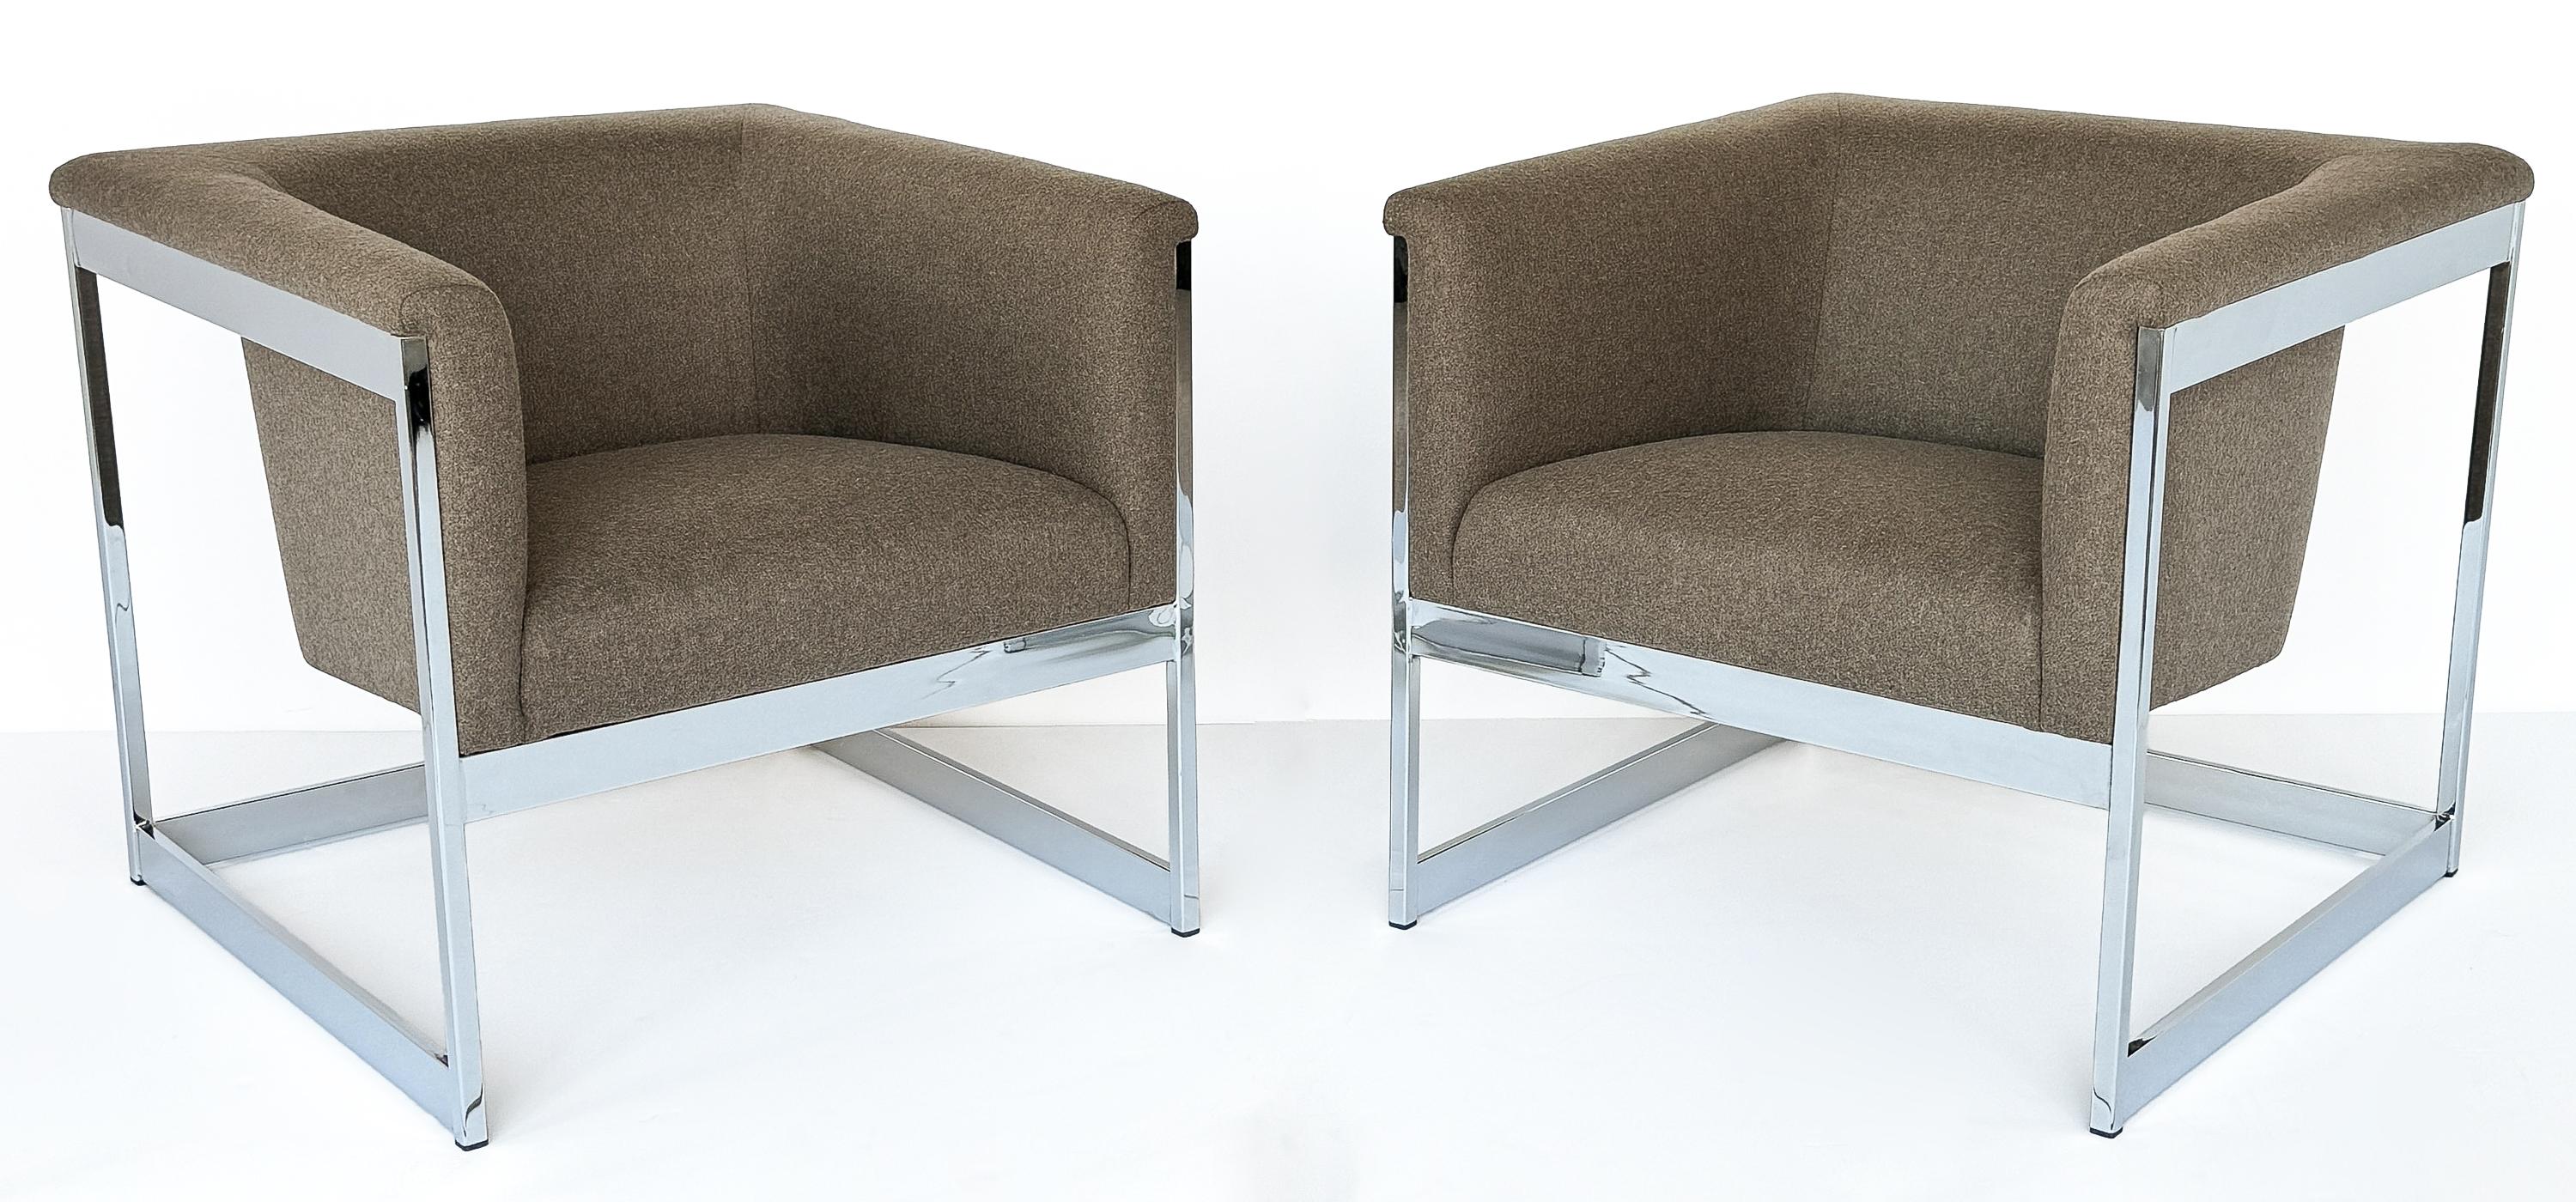 Introducing a pair of Milo Baughman chrome frame cube lounge chairs, circa 1970s. These sleek modern chairs have been newly upholstered in a mousy brown heathered felted wool blend fabric.  A fabric swatch is available upon request.  The tight